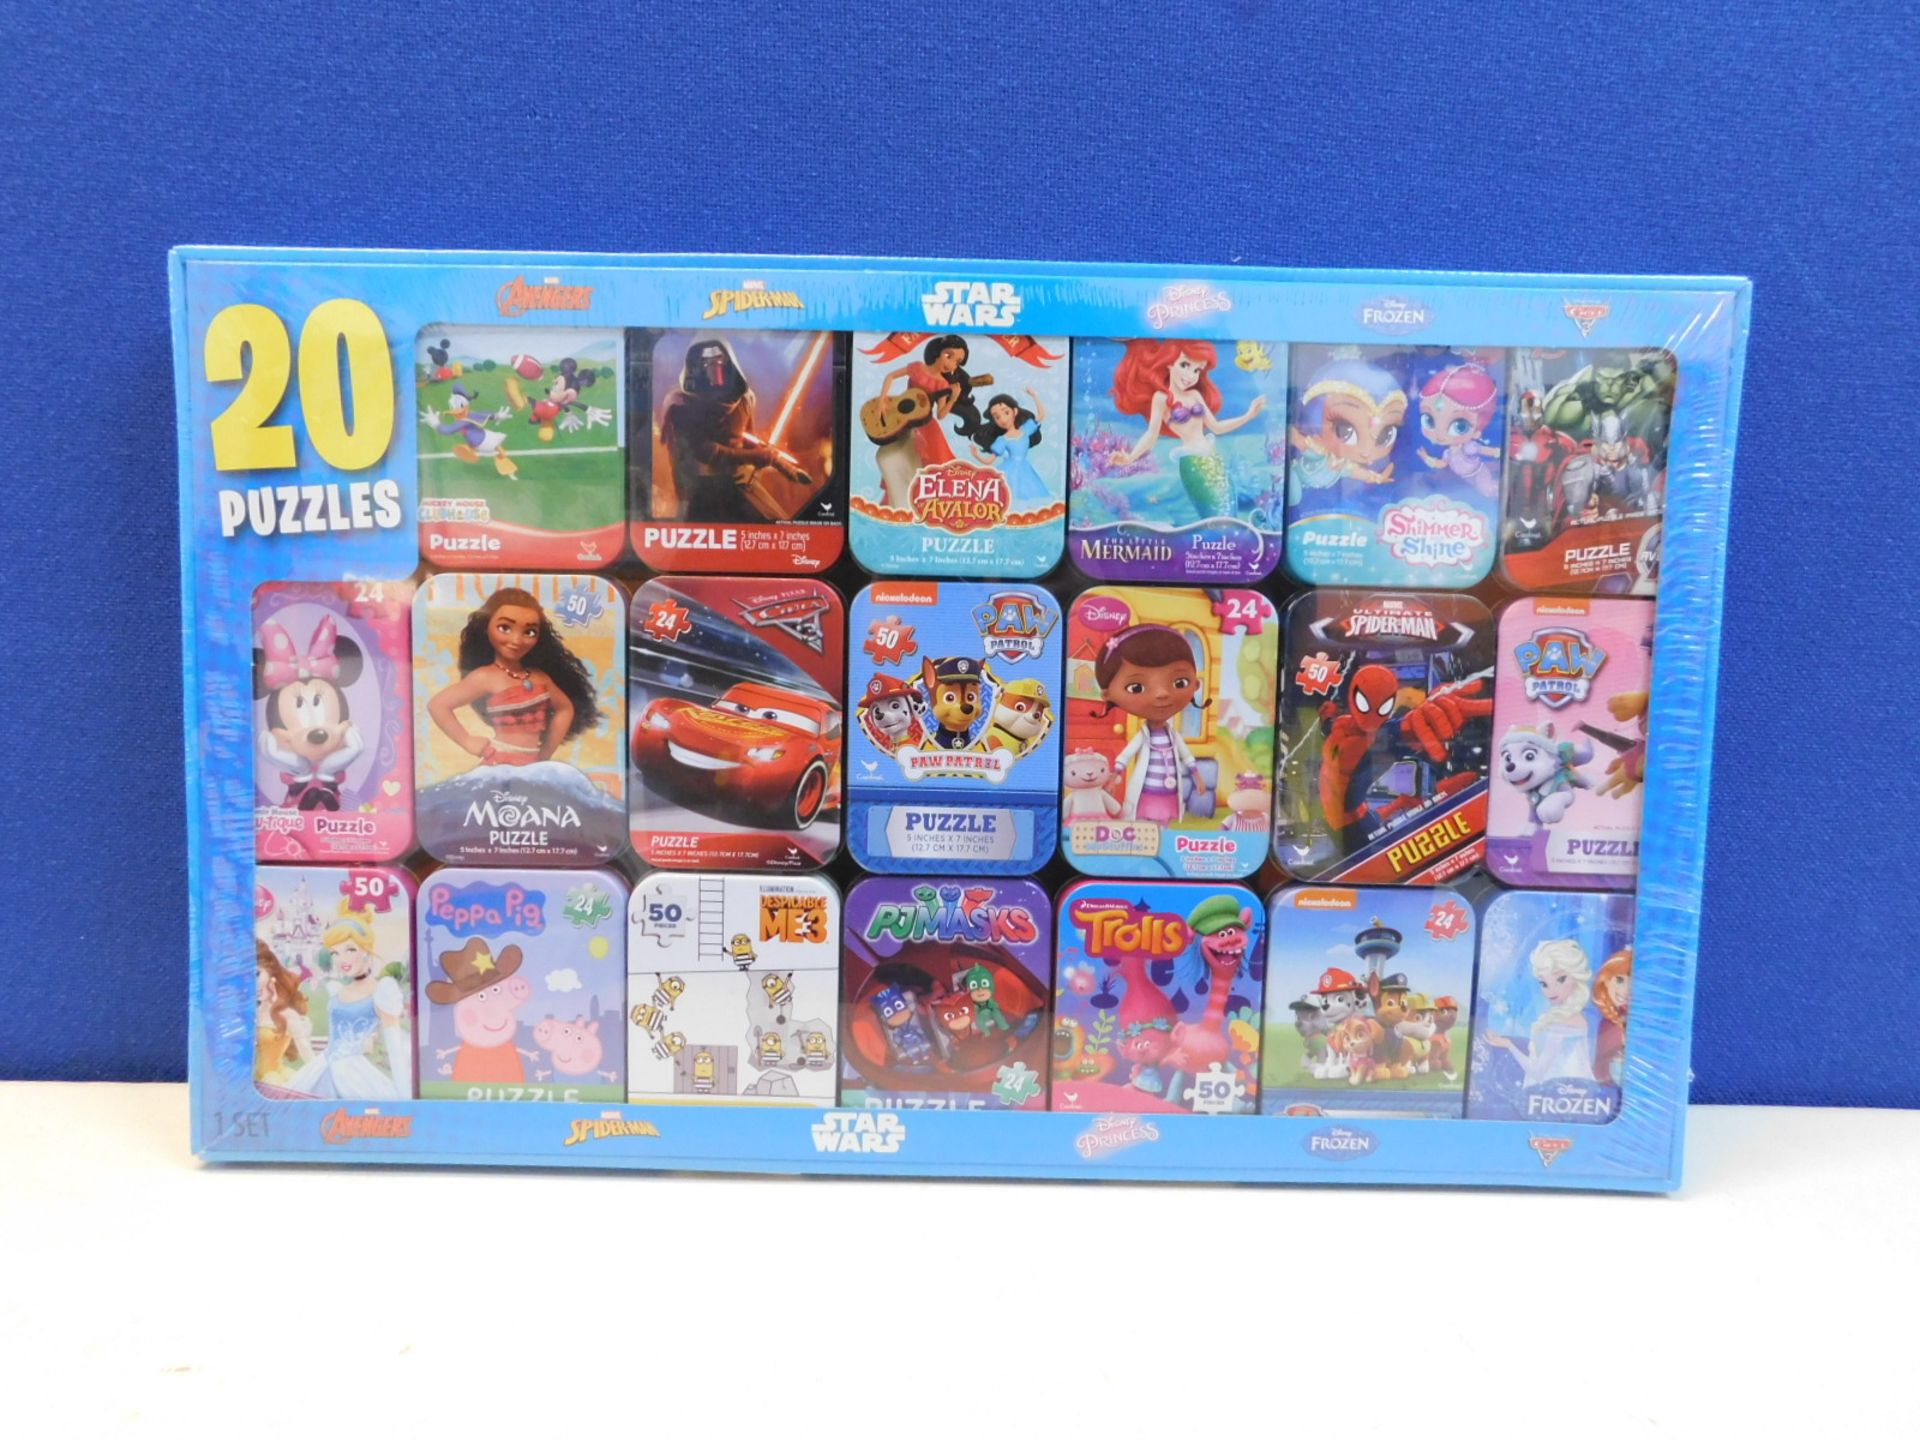 1 BRAND NEW SEALED LICENSED JIGSAW PUZZLES IN MINI TINS 20 PACK GIFT SET RRP £29.99